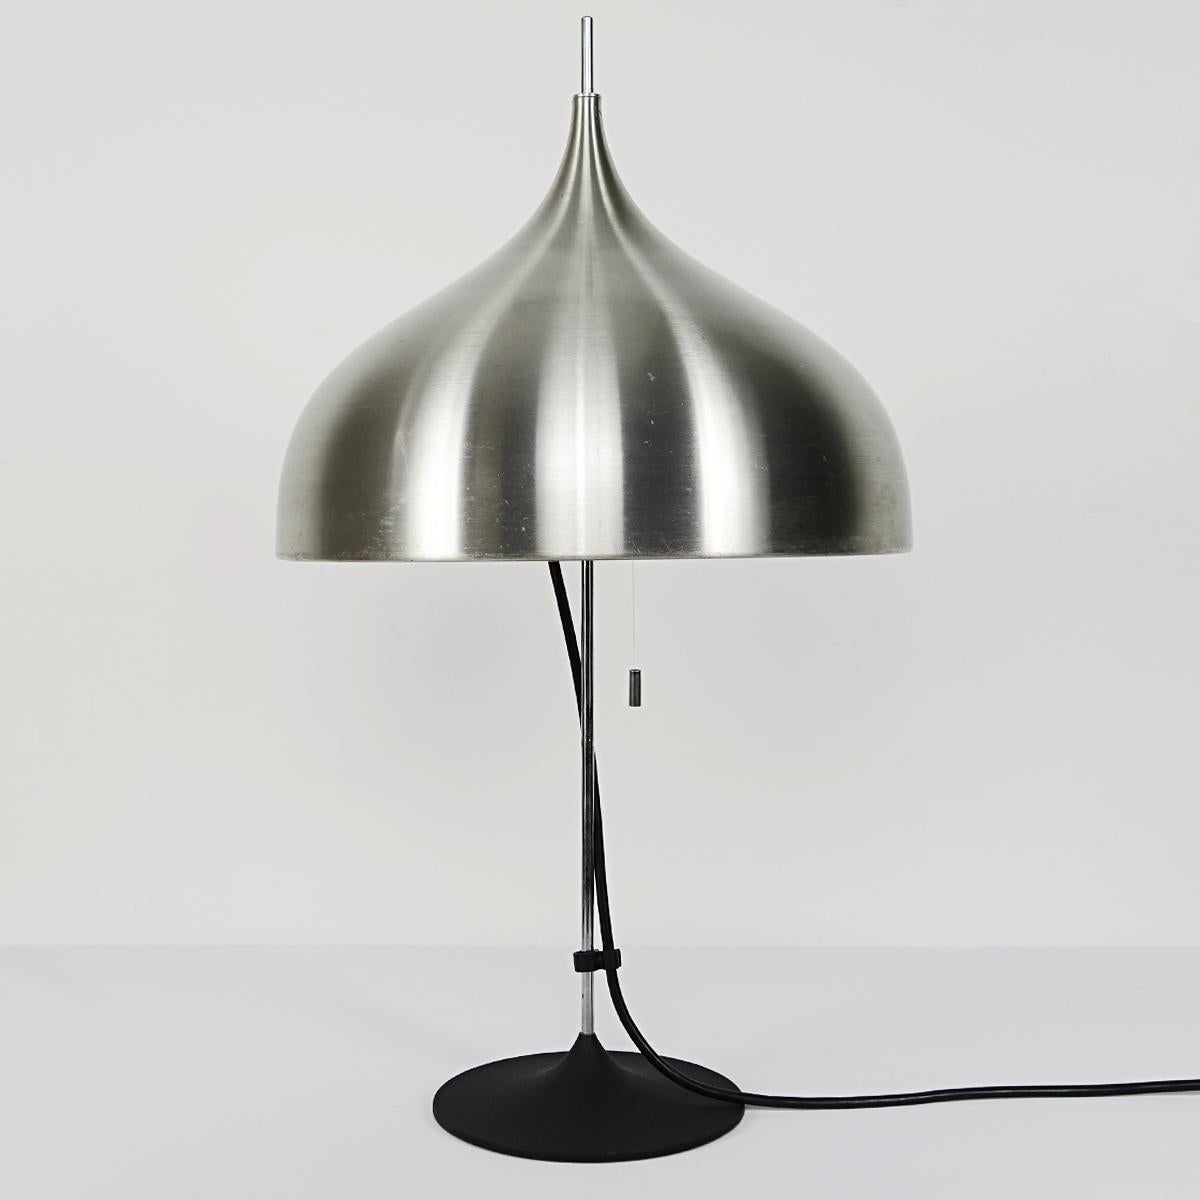 This Mid-Century Modern table lamp was made by Doria. It has a black cast iron foot in the shape of a tulip. The chrome 'bar' carrying the shade is beautifully thin and goes on above the elegantly shaped stainless steel shade.
Contains two light